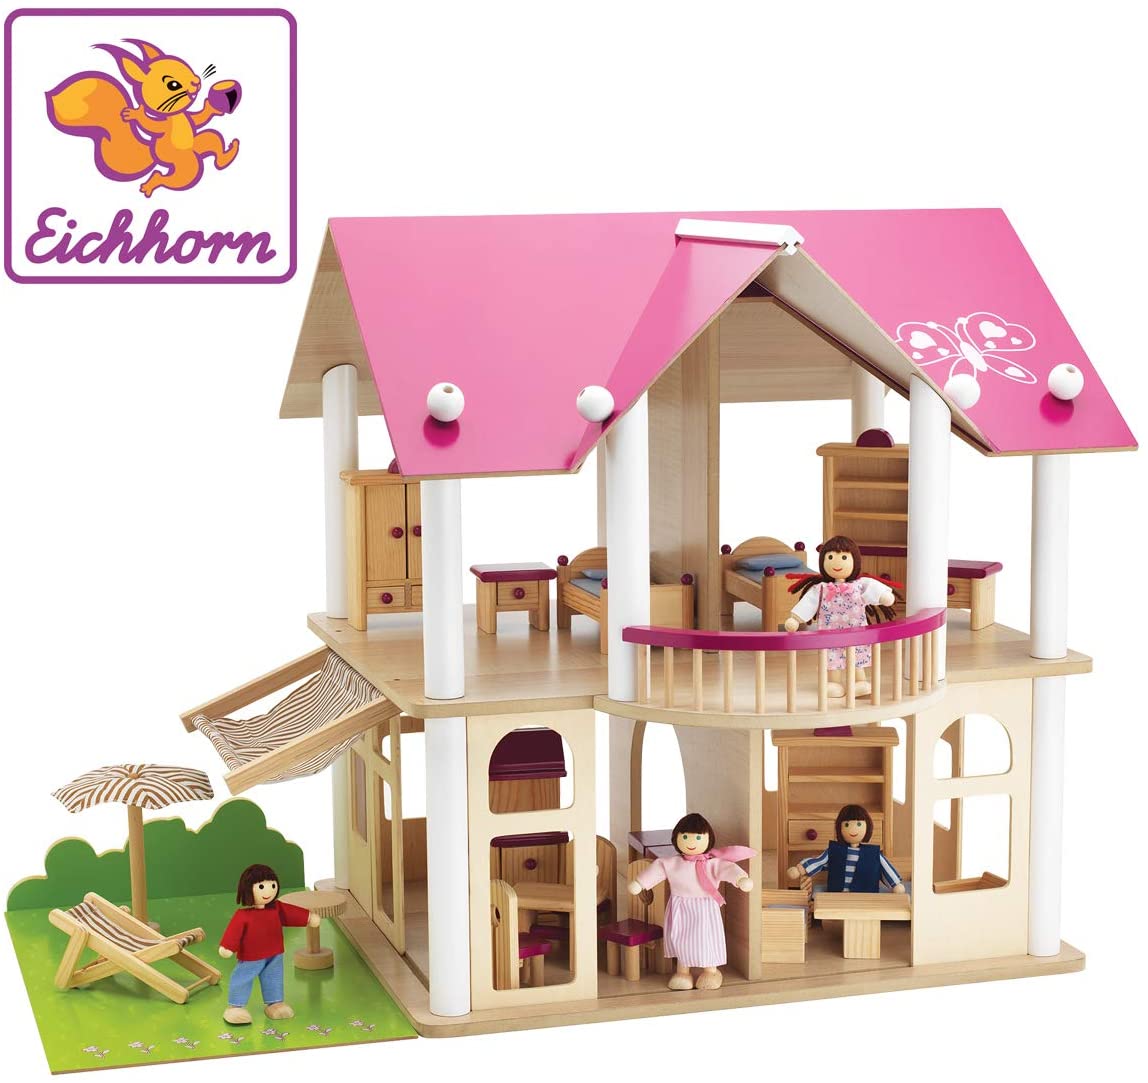 Eichhorn 2513 Dolls Villa With Figures And Furniture